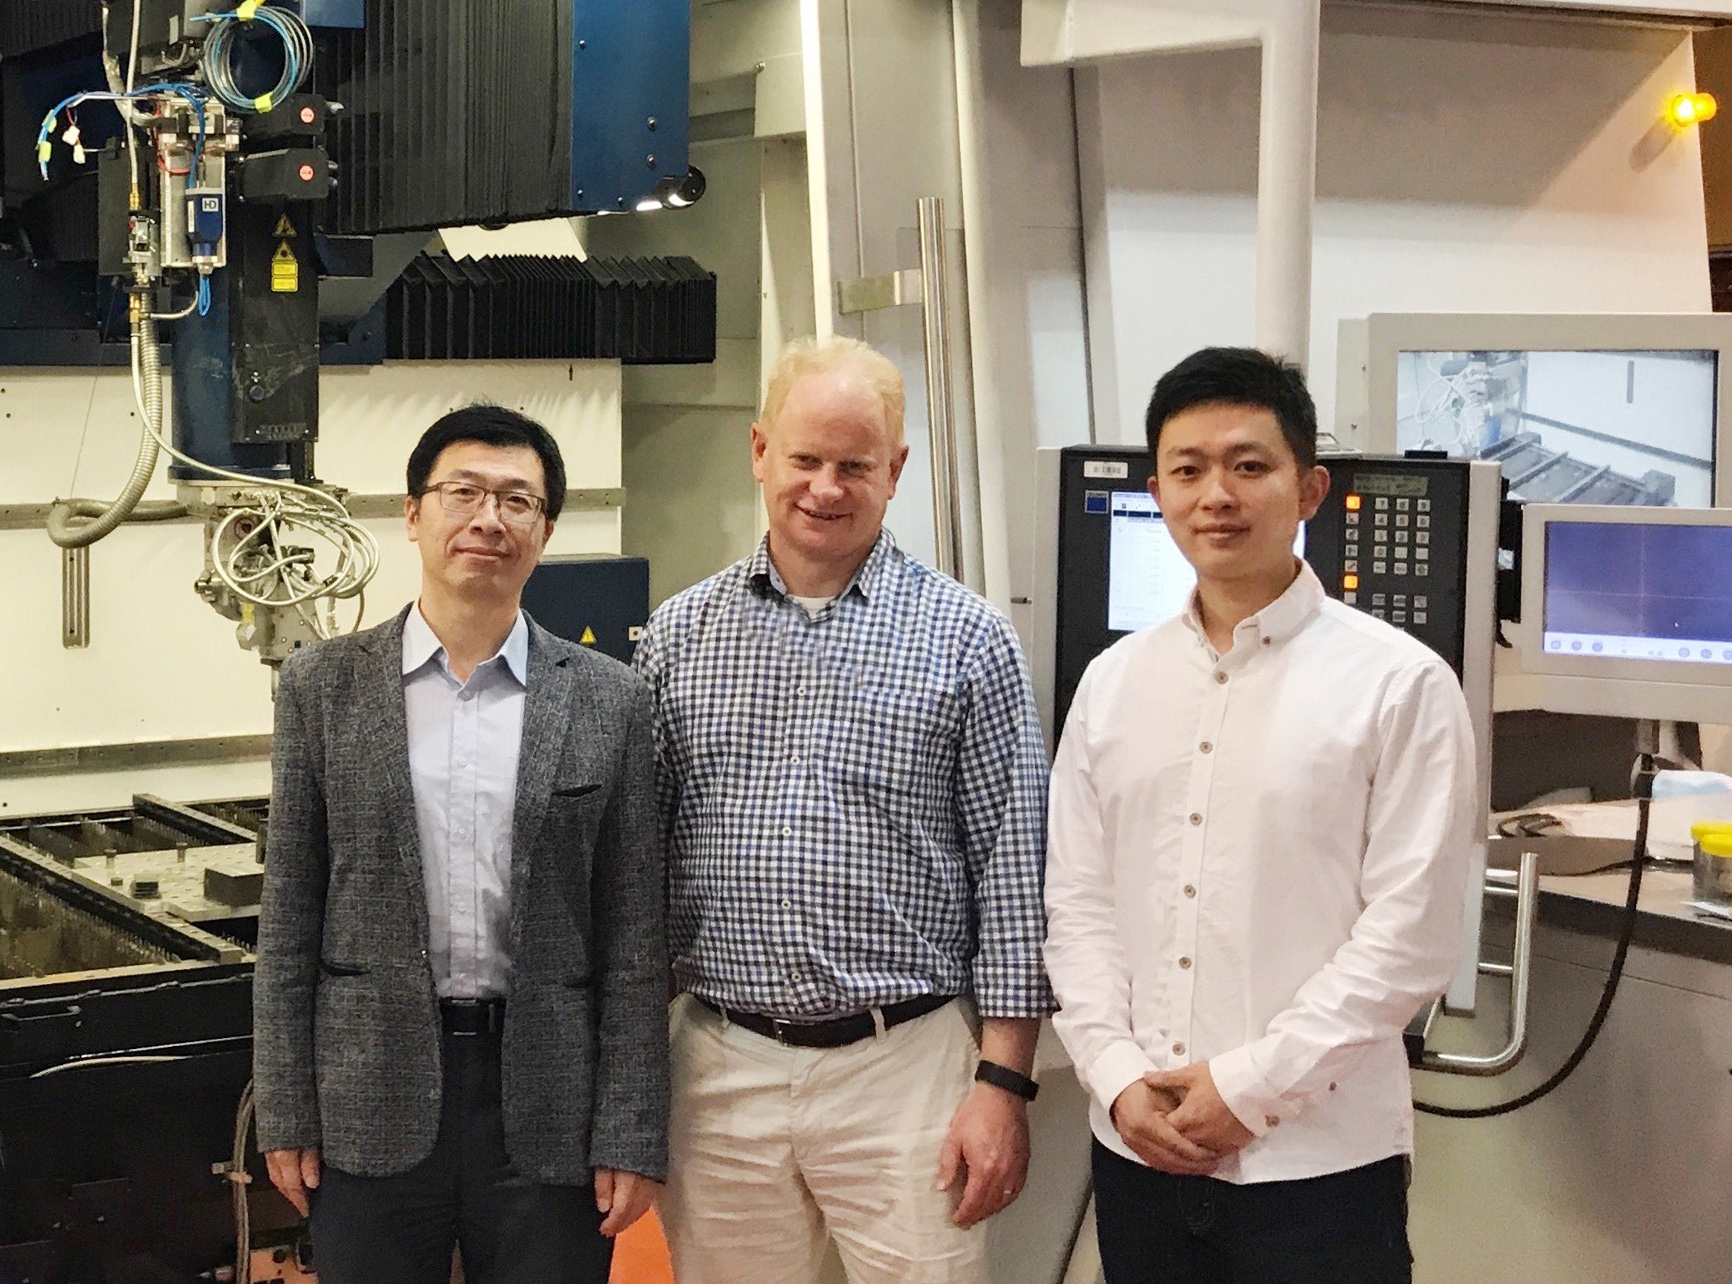 RMIT researchers involved in the multi-partner collaboration: Dr Dong Qiu, Professor Mark Easton and Dr Duyao Zhang.